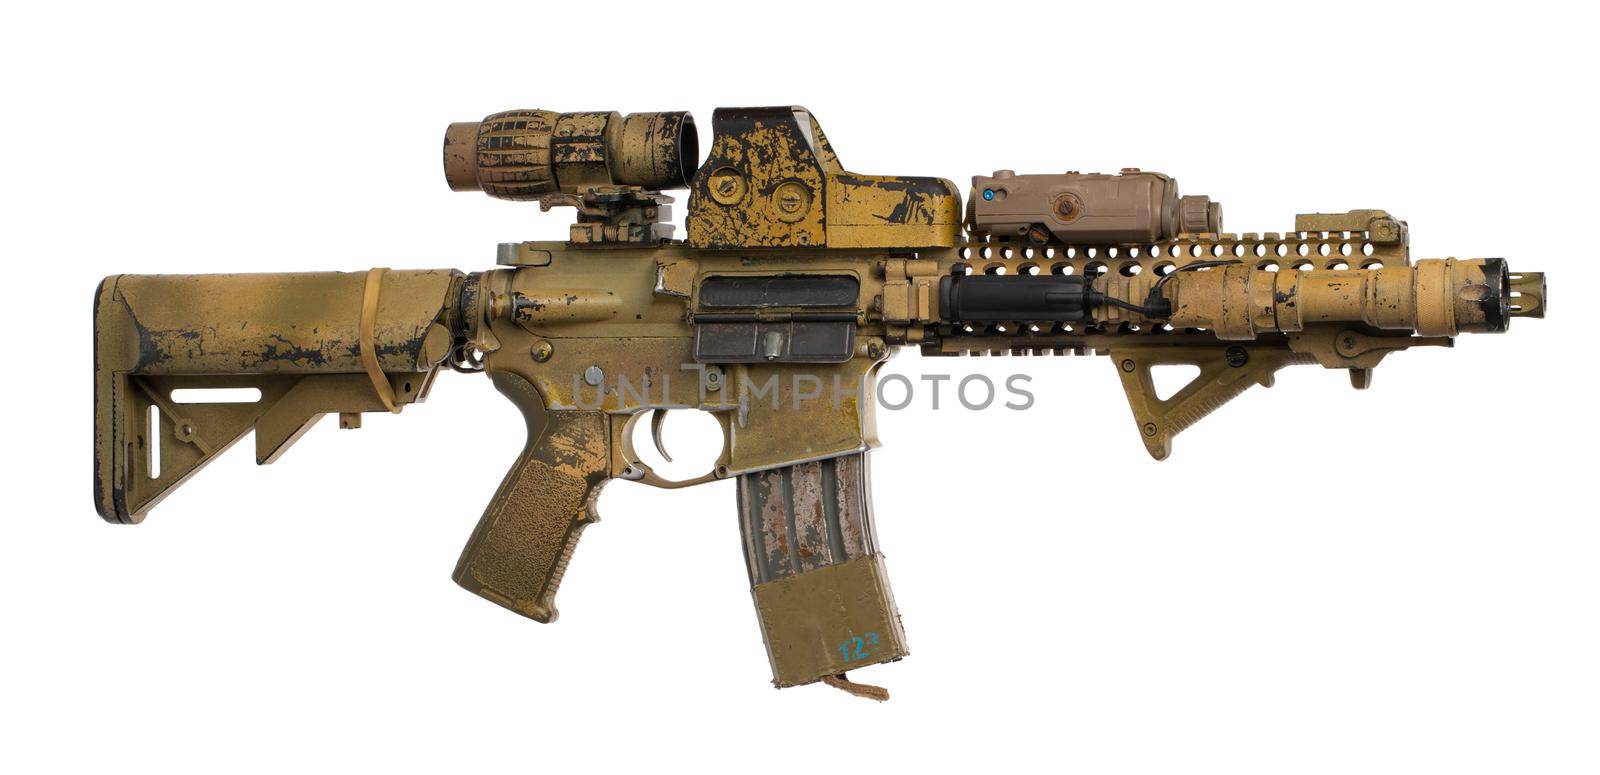 Military toy airsoft rifle isolated on white background. Close up.